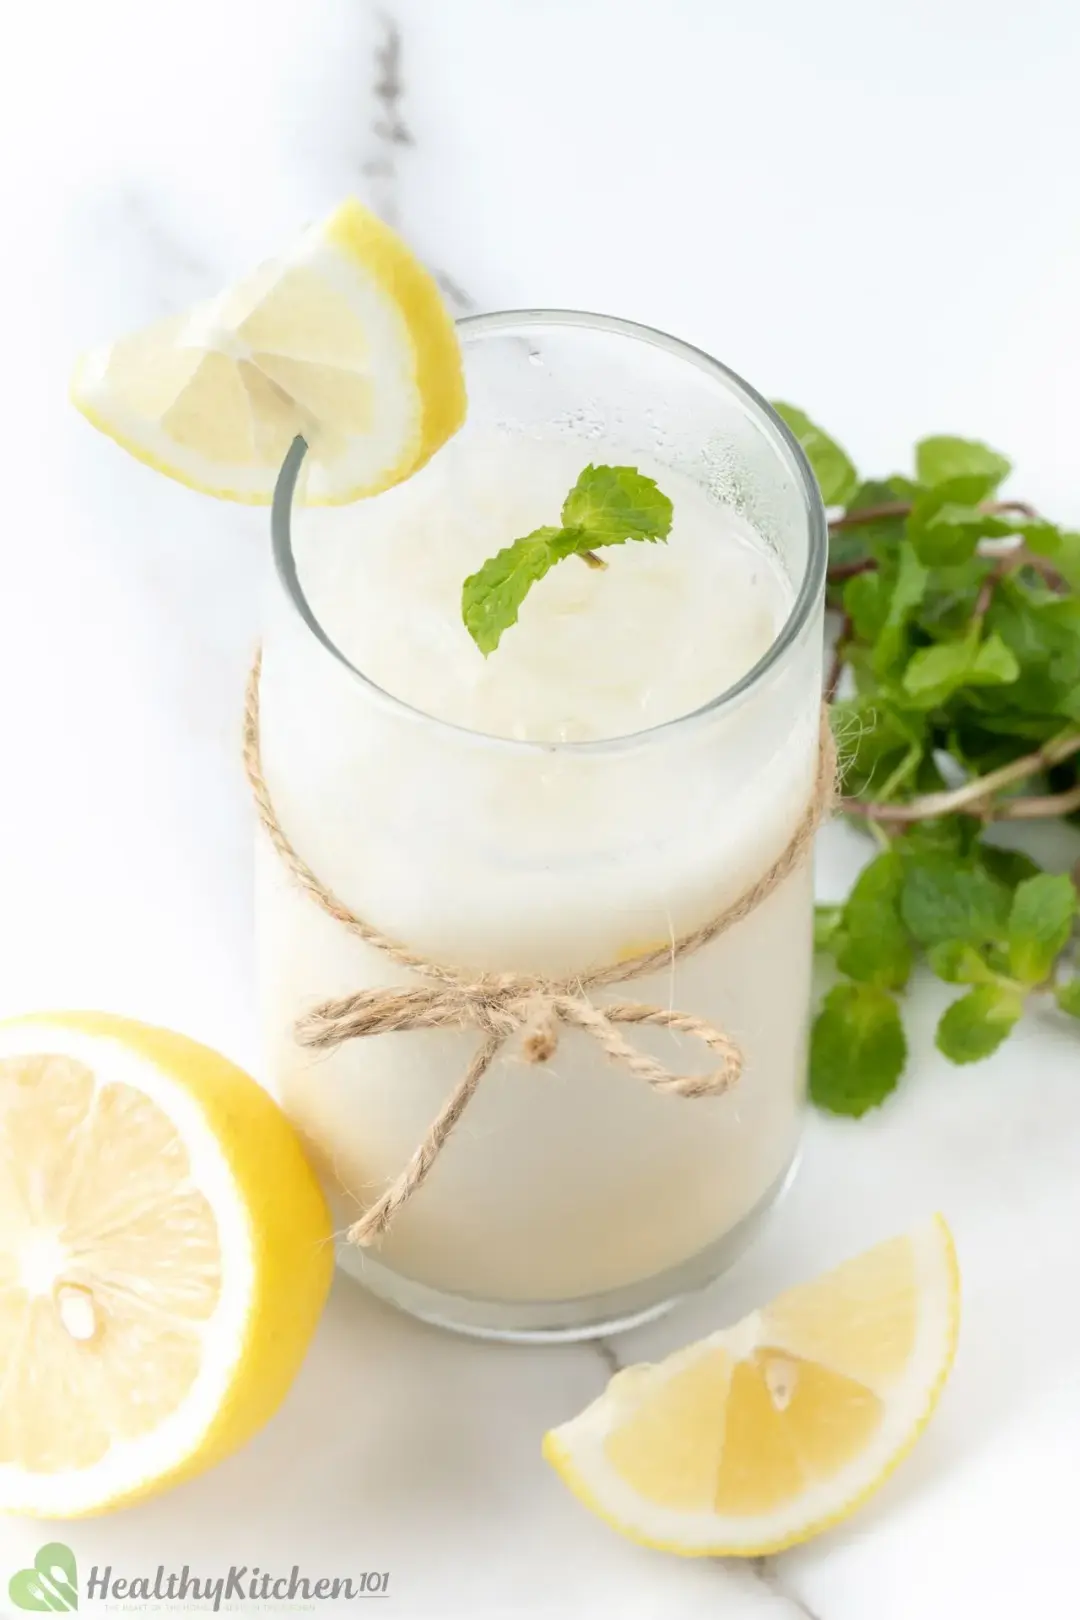 A glass of iced milk and lemon juice, garnished with lemons and mints and tied with a kitchen string